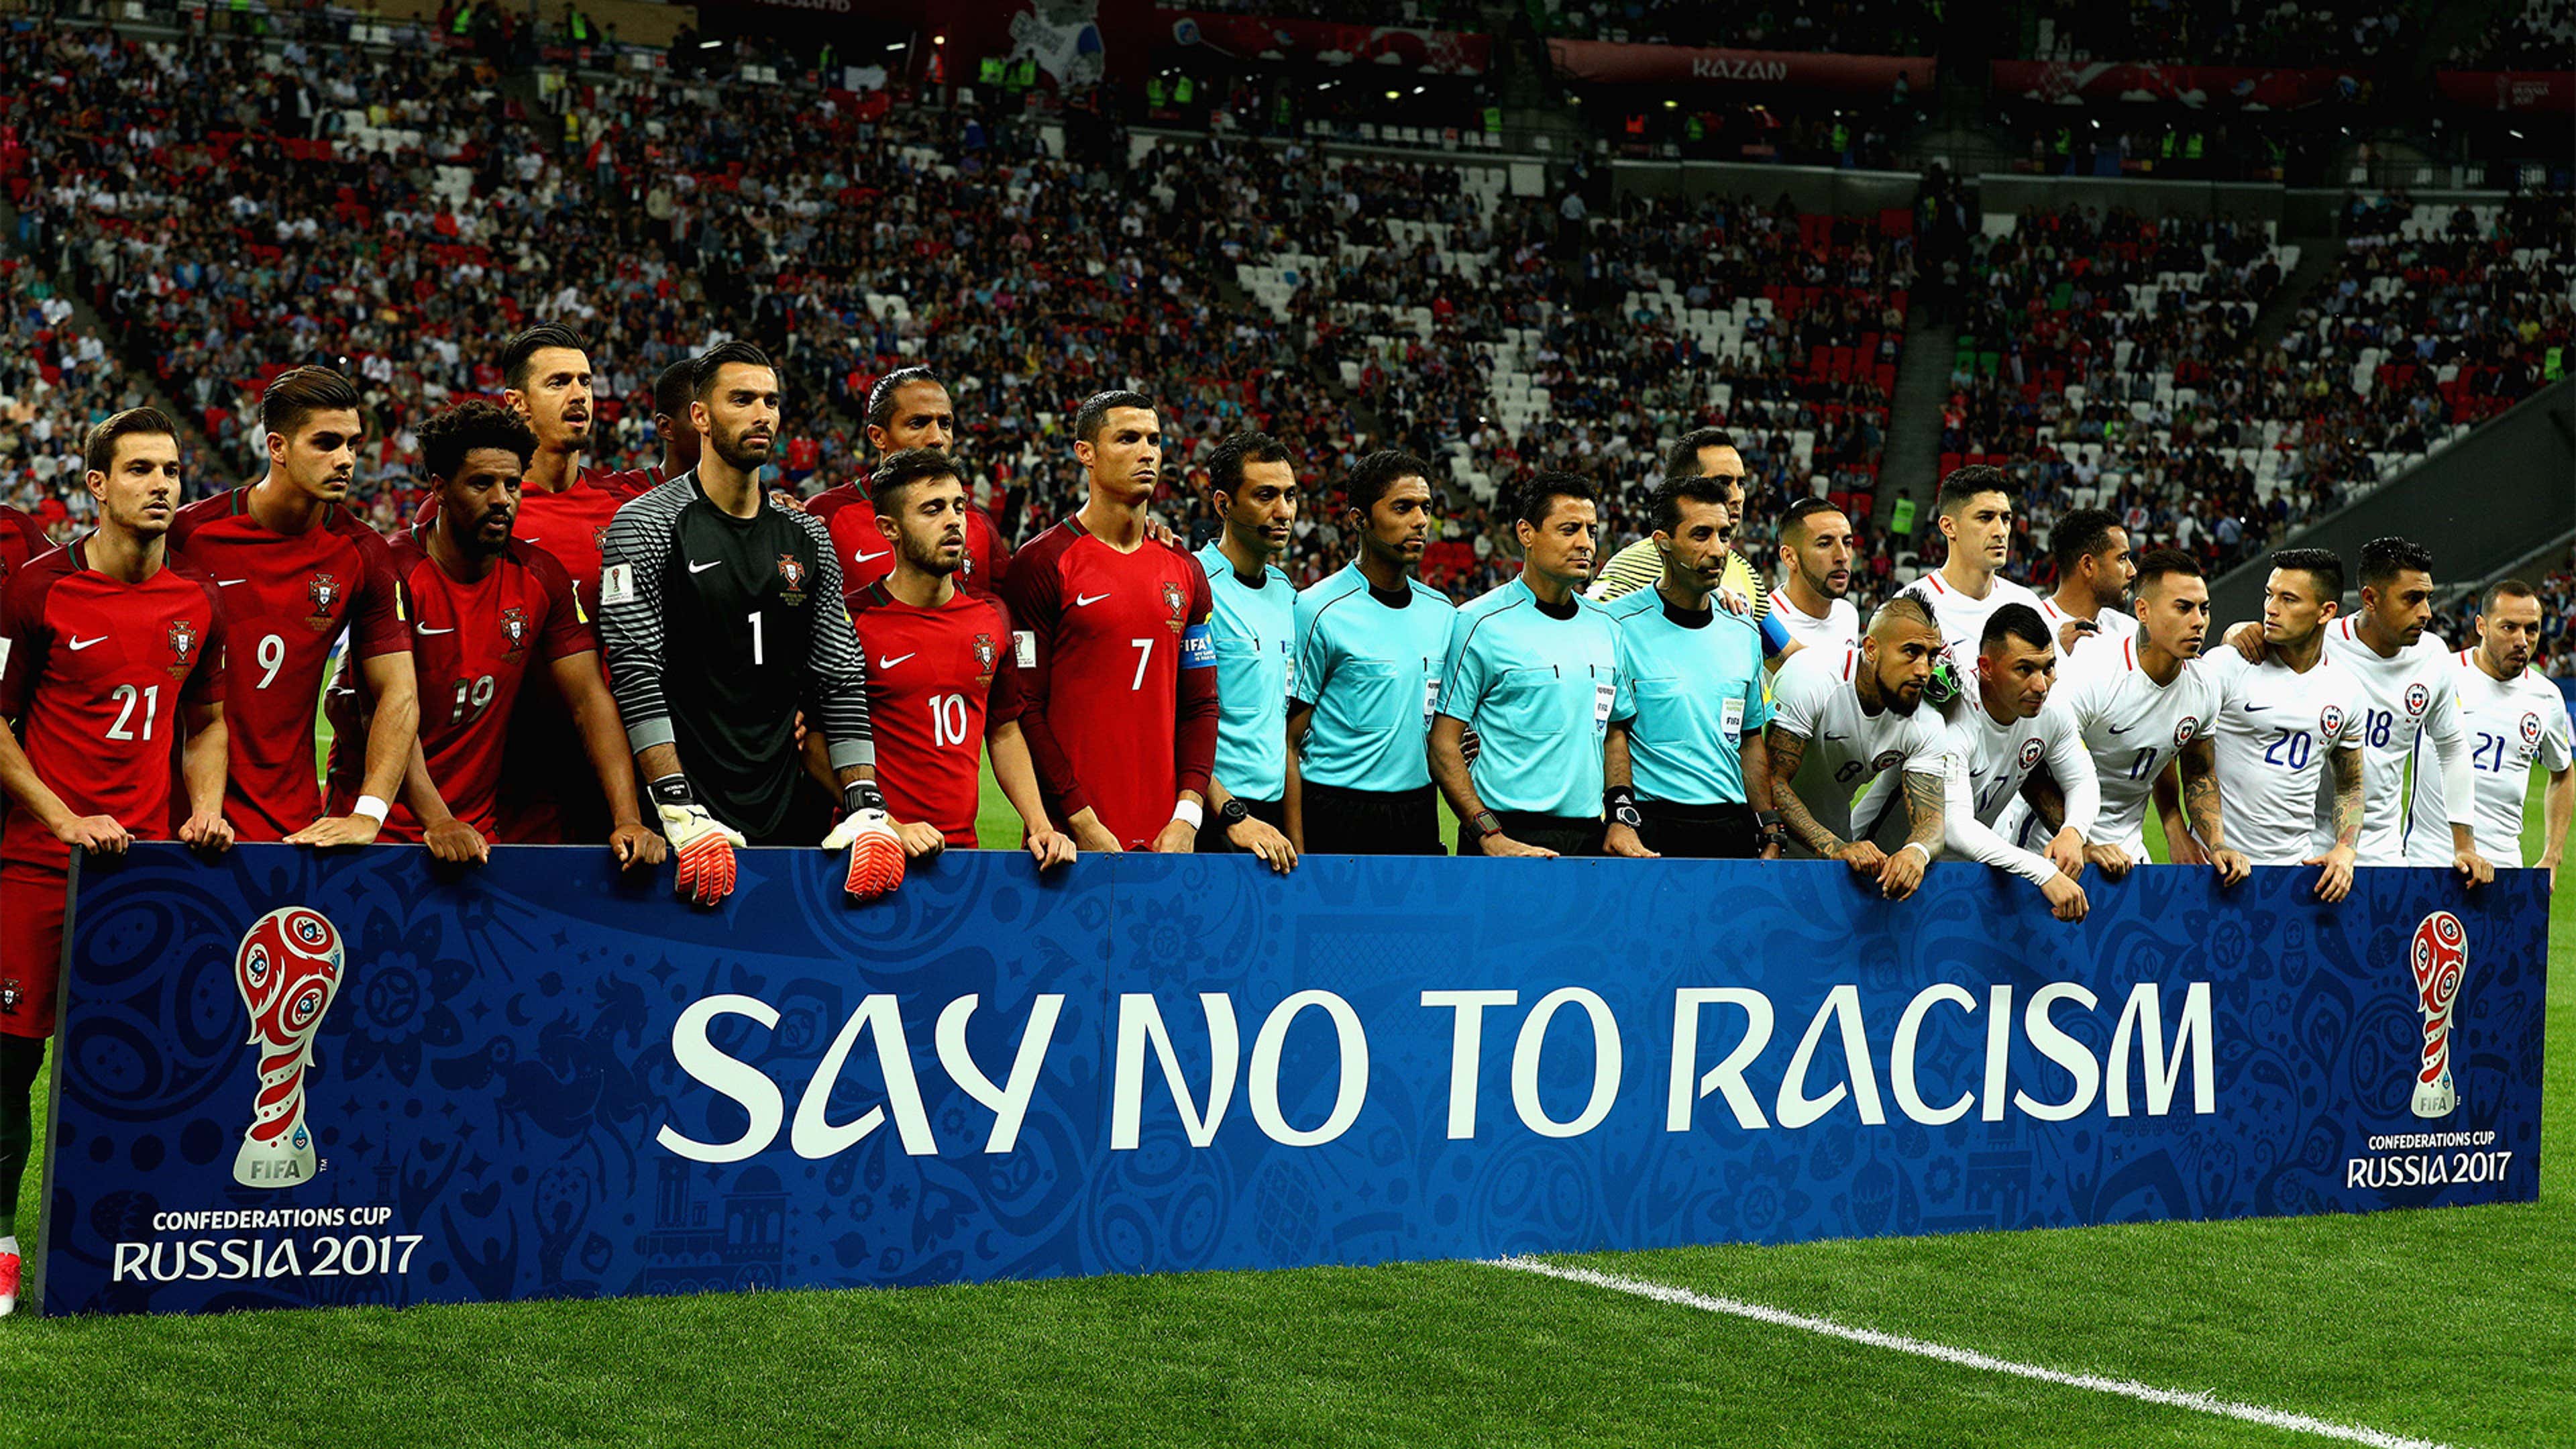 Say no to racism